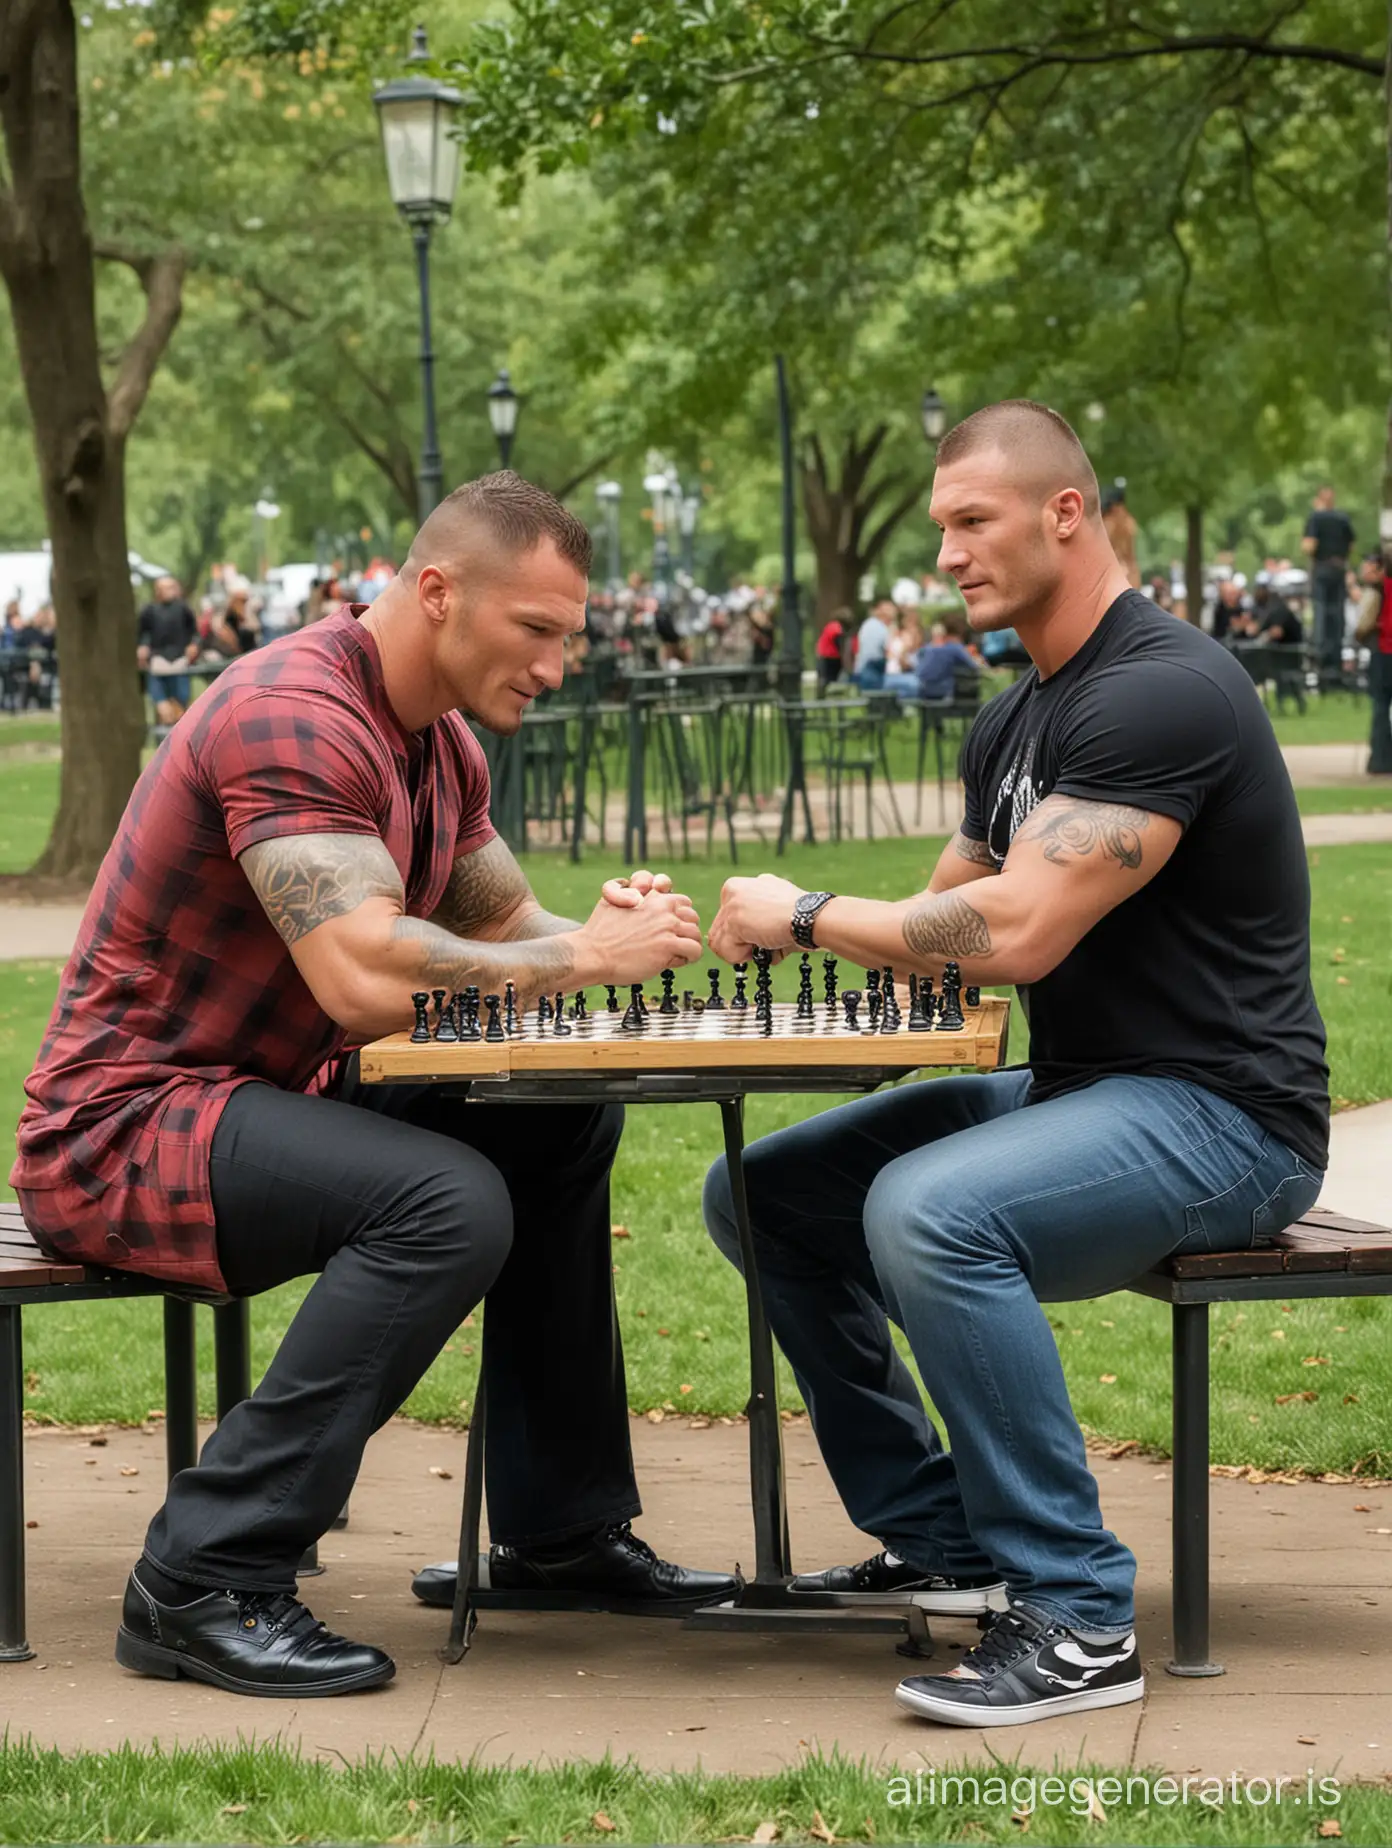 Randy-Orton-and-Edge-Strategize-in-Intense-Chess-Match-at-the-Park